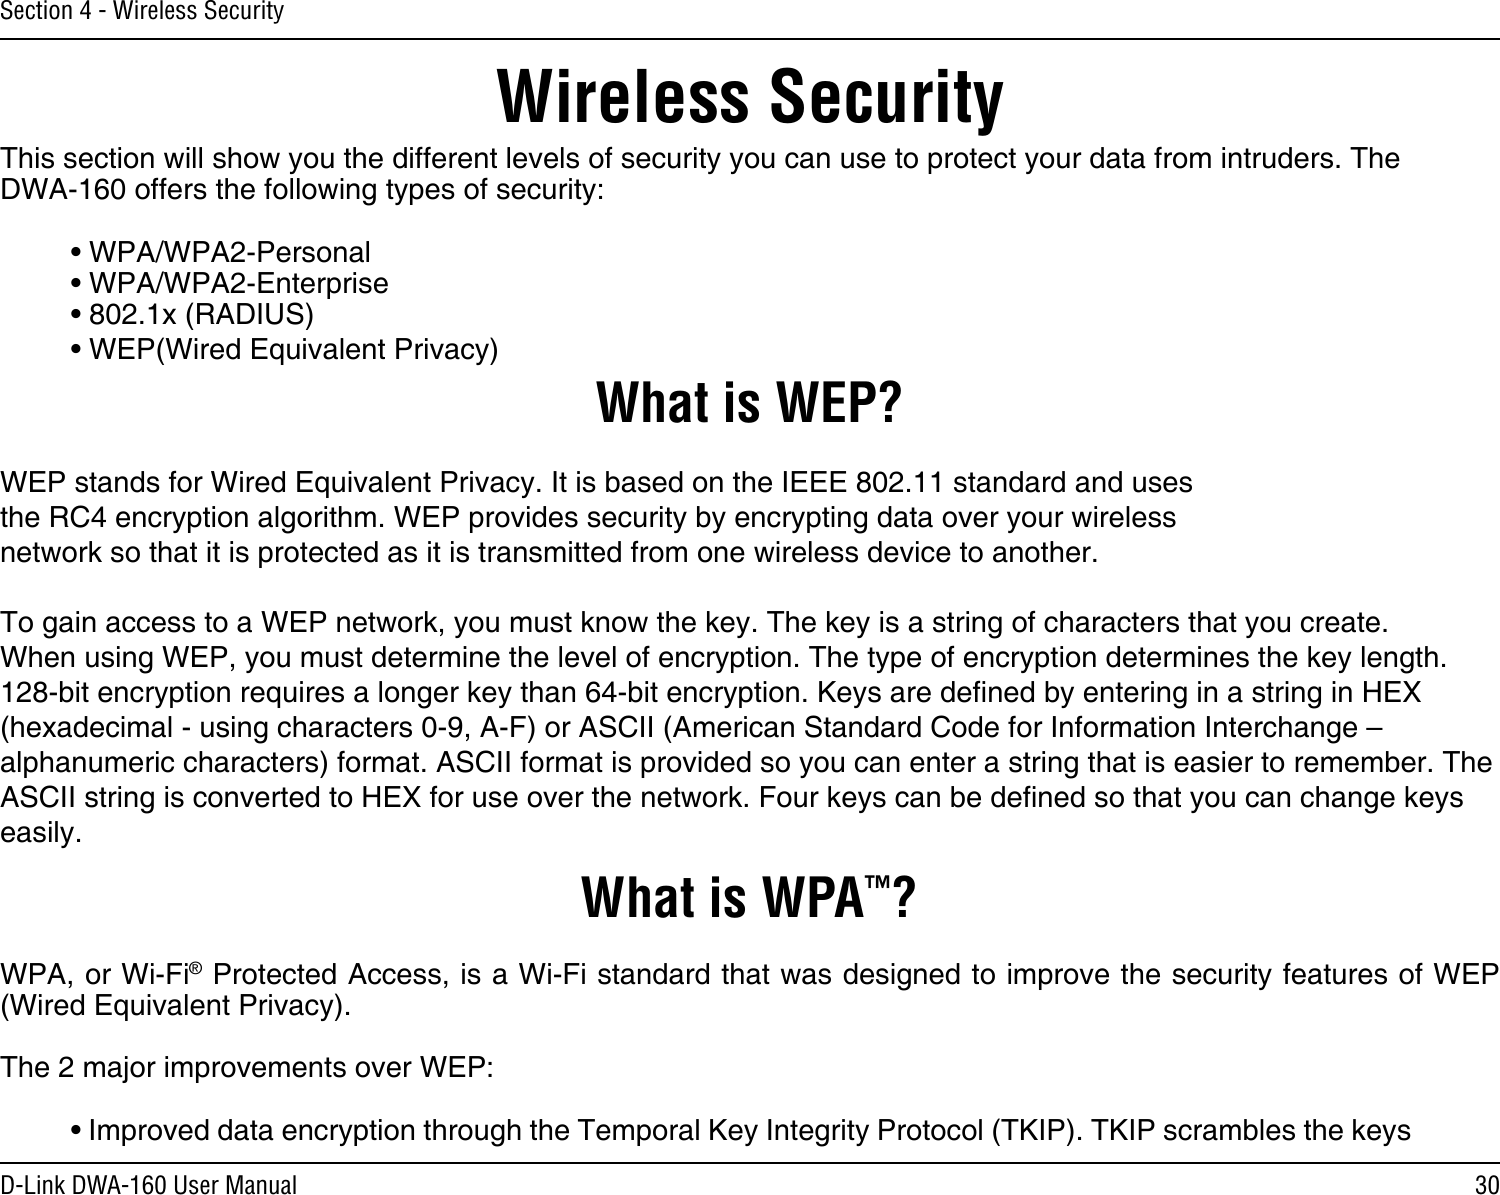 30D-Link DWA-160 User ManualSection 4 - Wireless SecurityWireless SecurityThis section will show you the different levels of security you can use to protect your data from intruders. The DWA-160 offers the following types of security:• WPA/WPA2-Personal    • WPA/WPA2-Enterprise• 802.1x (RADIUS)• WEP(Wired Equivalent Privacy)What is WEP?WEP stands for Wired Equivalent Privacy. It is based on the IEEE 802.11 standard and uses the RC4 encryption algorithm. WEP provides security by encrypting data over your wireless network so that it is protected as it is transmitted from one wireless device to another.To gain access to a WEP network, you must know the key. The key is a string of characters that you create. When using WEP, you must determine the level of encryption. The type of encryption determines the key length. 128-bit encryption requires a longer key than 64-bit encryption. Keys are dened by entering in a string in HEX (hexadecimal - using characters 0-9, A-F) or ASCII (American Standard Code for Information Interchange – alphanumeric characters) format. ASCII format is provided so you can enter a string that is easier to remember. The ASCII string is converted to HEX for use over the network. Four keys can be dened so that you can change keys easily.What is WPA™?WPA, or Wi-Fi® Protected Access, is a Wi-Fi standard that was designed to improve the security features of WEP (Wired Equivalent Privacy).  The 2 major improvements over WEP: • Improved data encryption through the Temporal Key Integrity Protocol (TKIP). TKIP scrambles the keys 